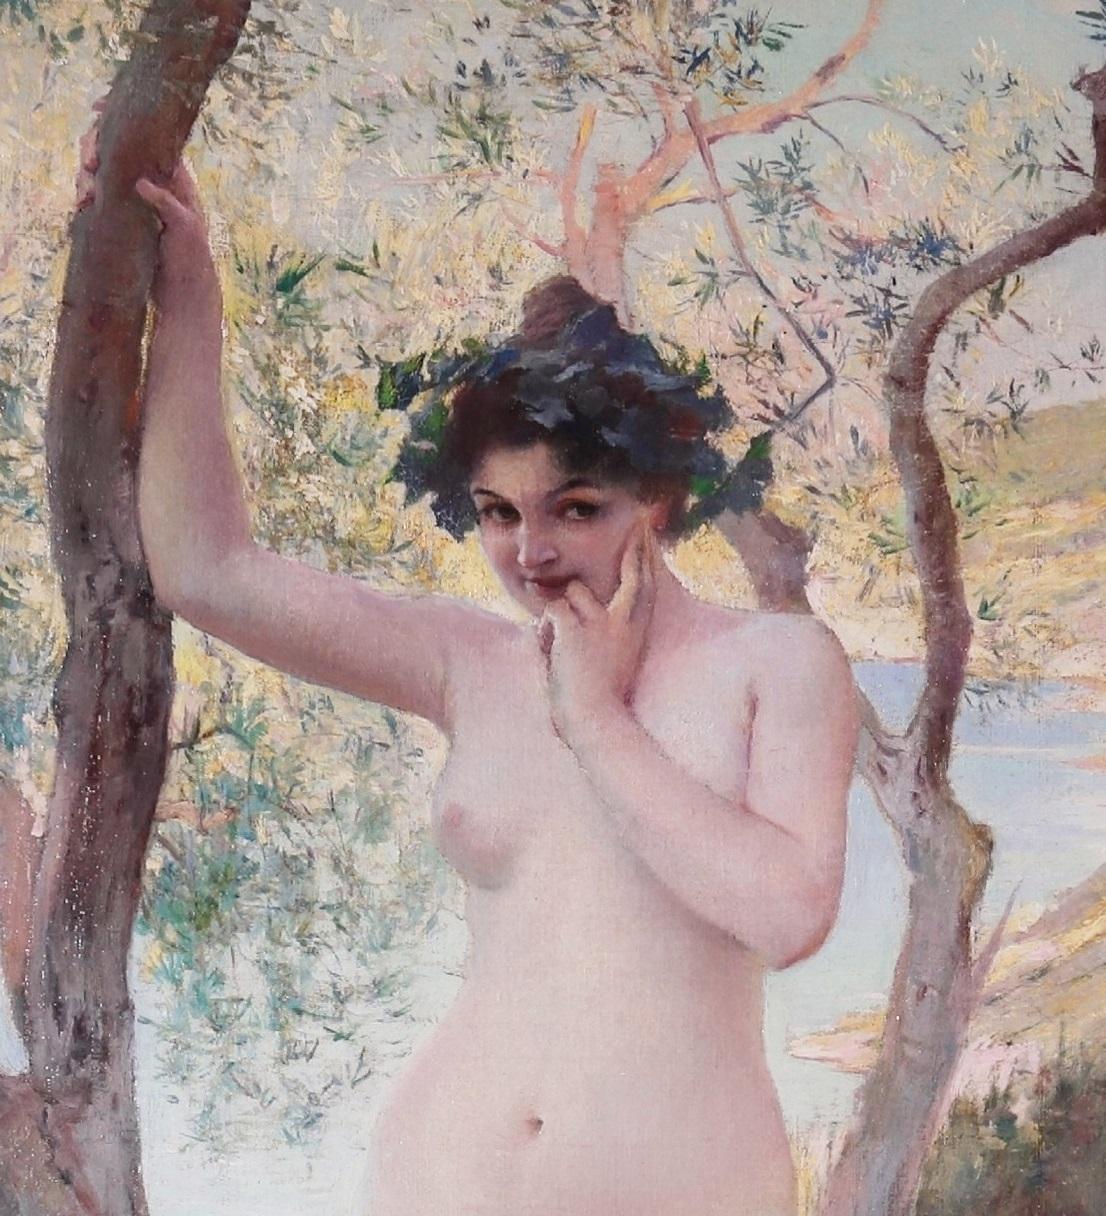 ‘The Wood Nymph’ by Paul-Jean-Louis Gervais (1859-1944). The painting is signed by the artist and presented in a fine quality bespoke gold metal leaf frame. 

All our paintings are offered in the finest condition they can be for their age having